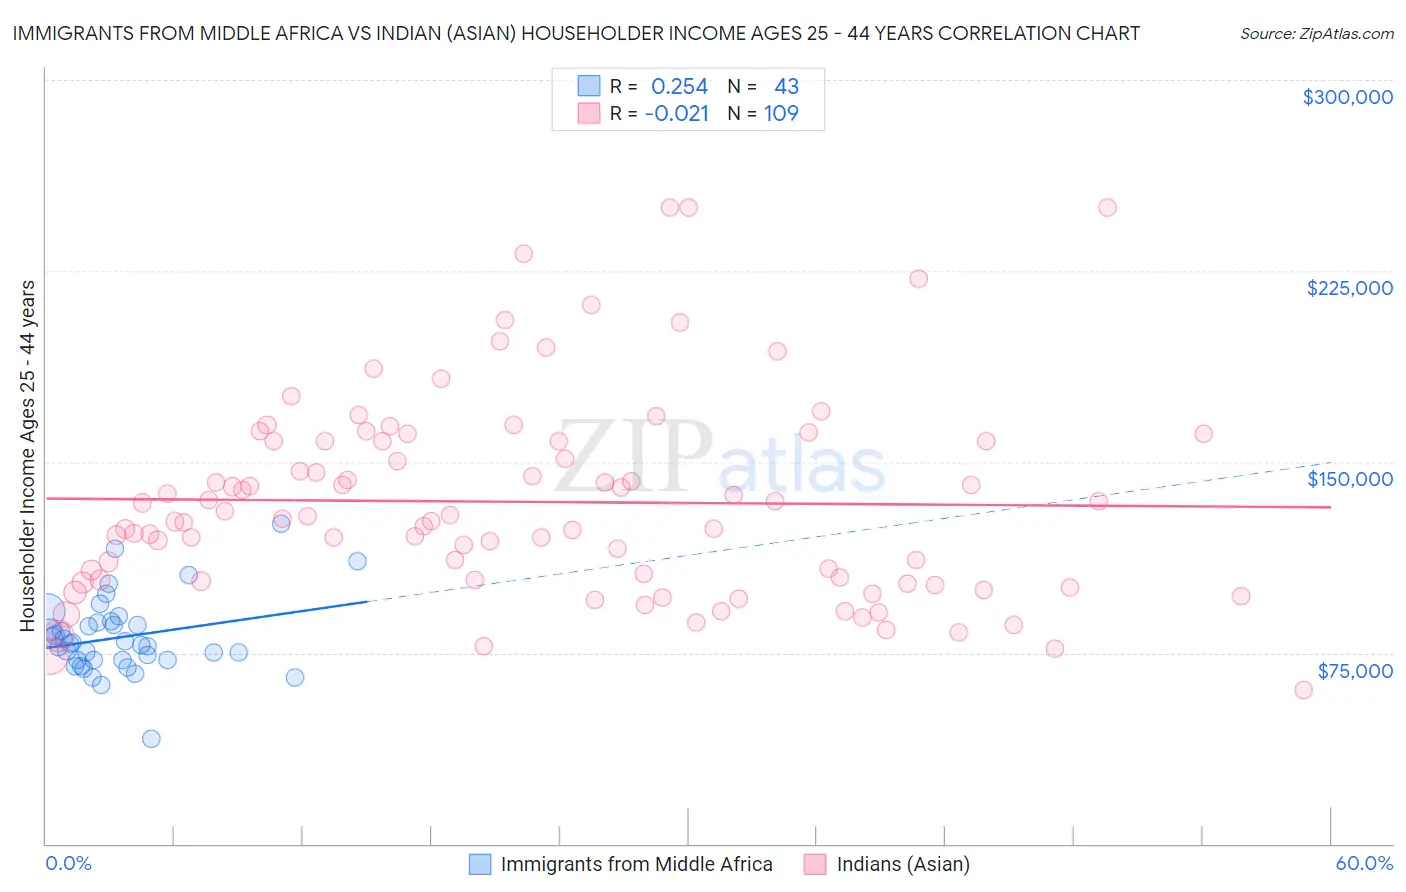 Immigrants from Middle Africa vs Indian (Asian) Householder Income Ages 25 - 44 years